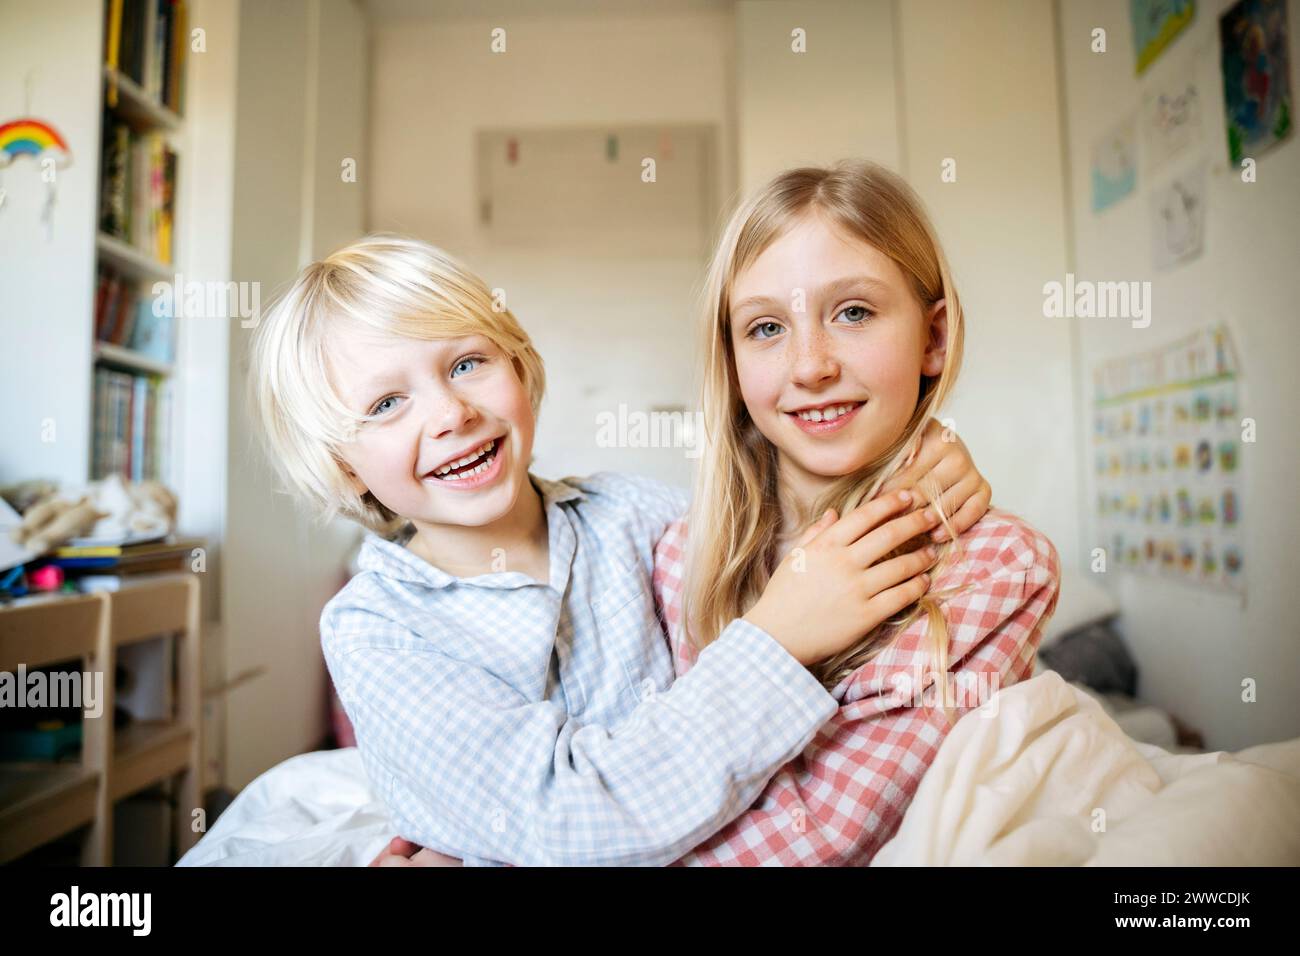 Smiling boy sitting with arm around sister in bedroom at home Stock Photo